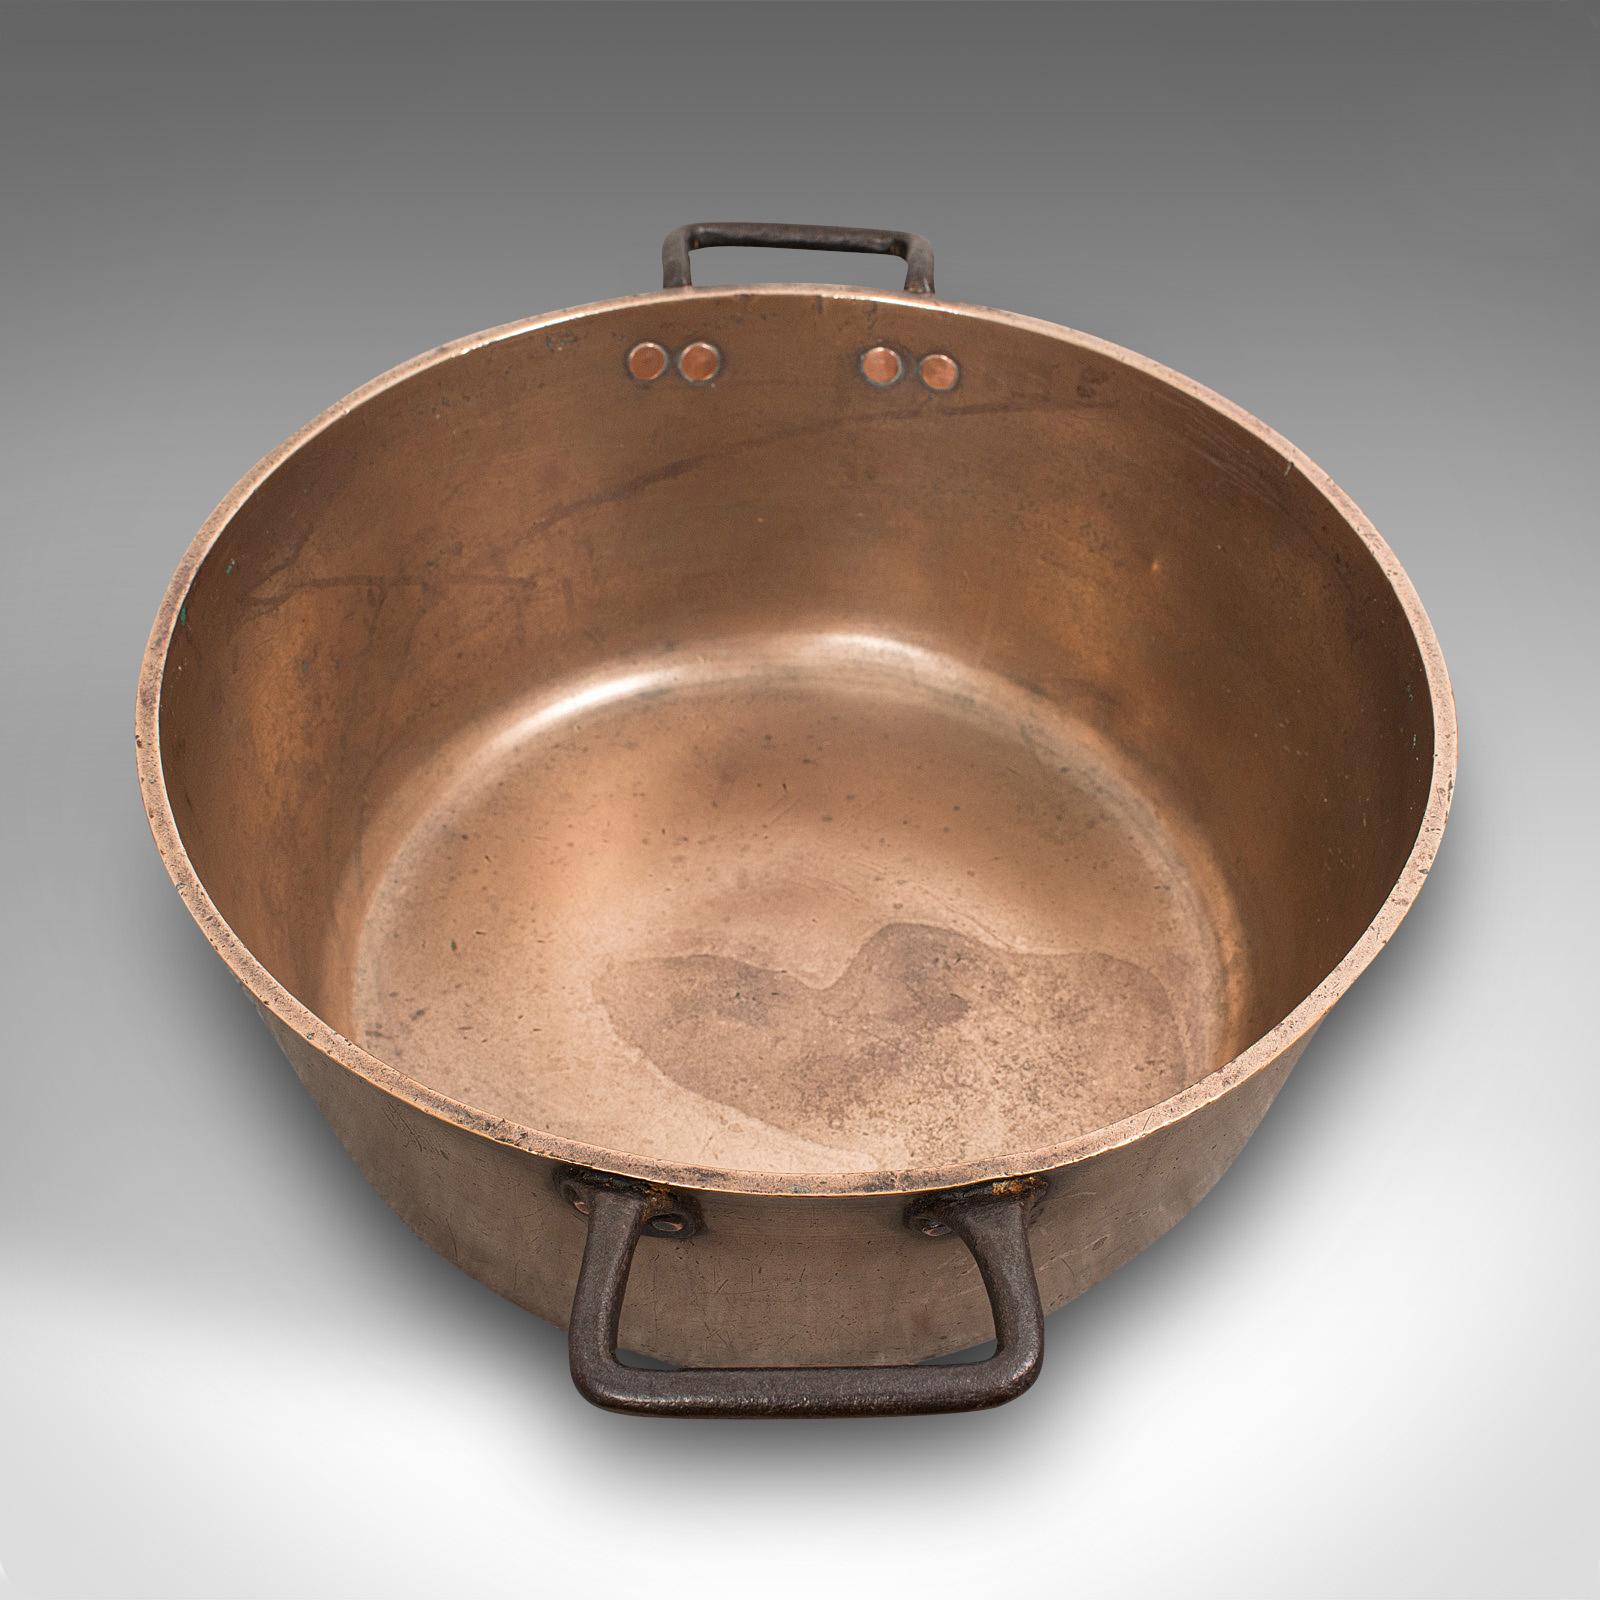 Antique Jam Pan, English, Bronze, Preserves Cooking Pot, Late 18th Century In Good Condition For Sale In Hele, Devon, GB